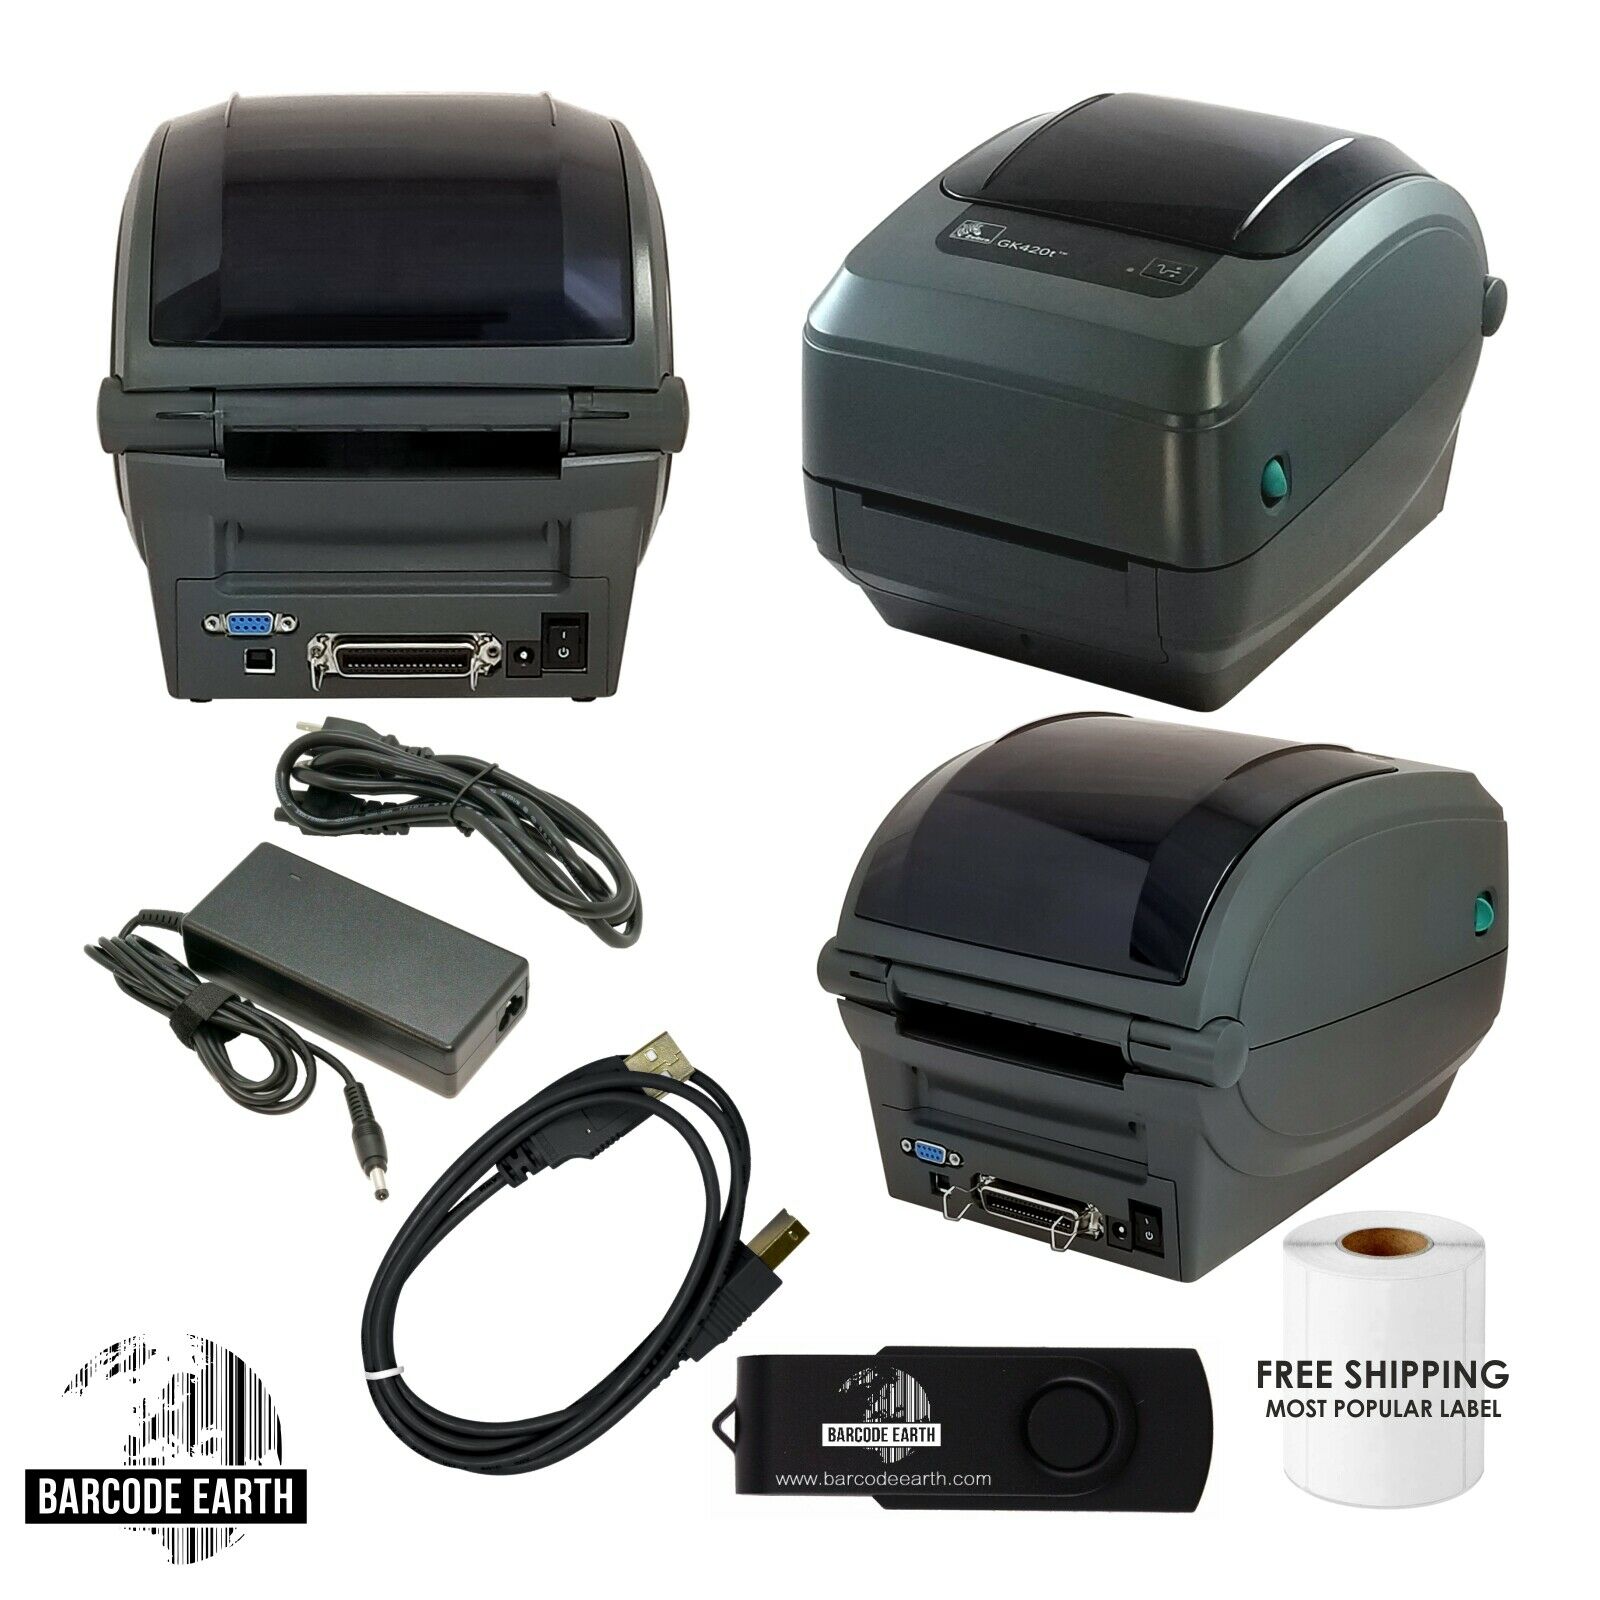 Zebra GK420t Barcode Printer! Bundle w/ Tech Support! All you need to